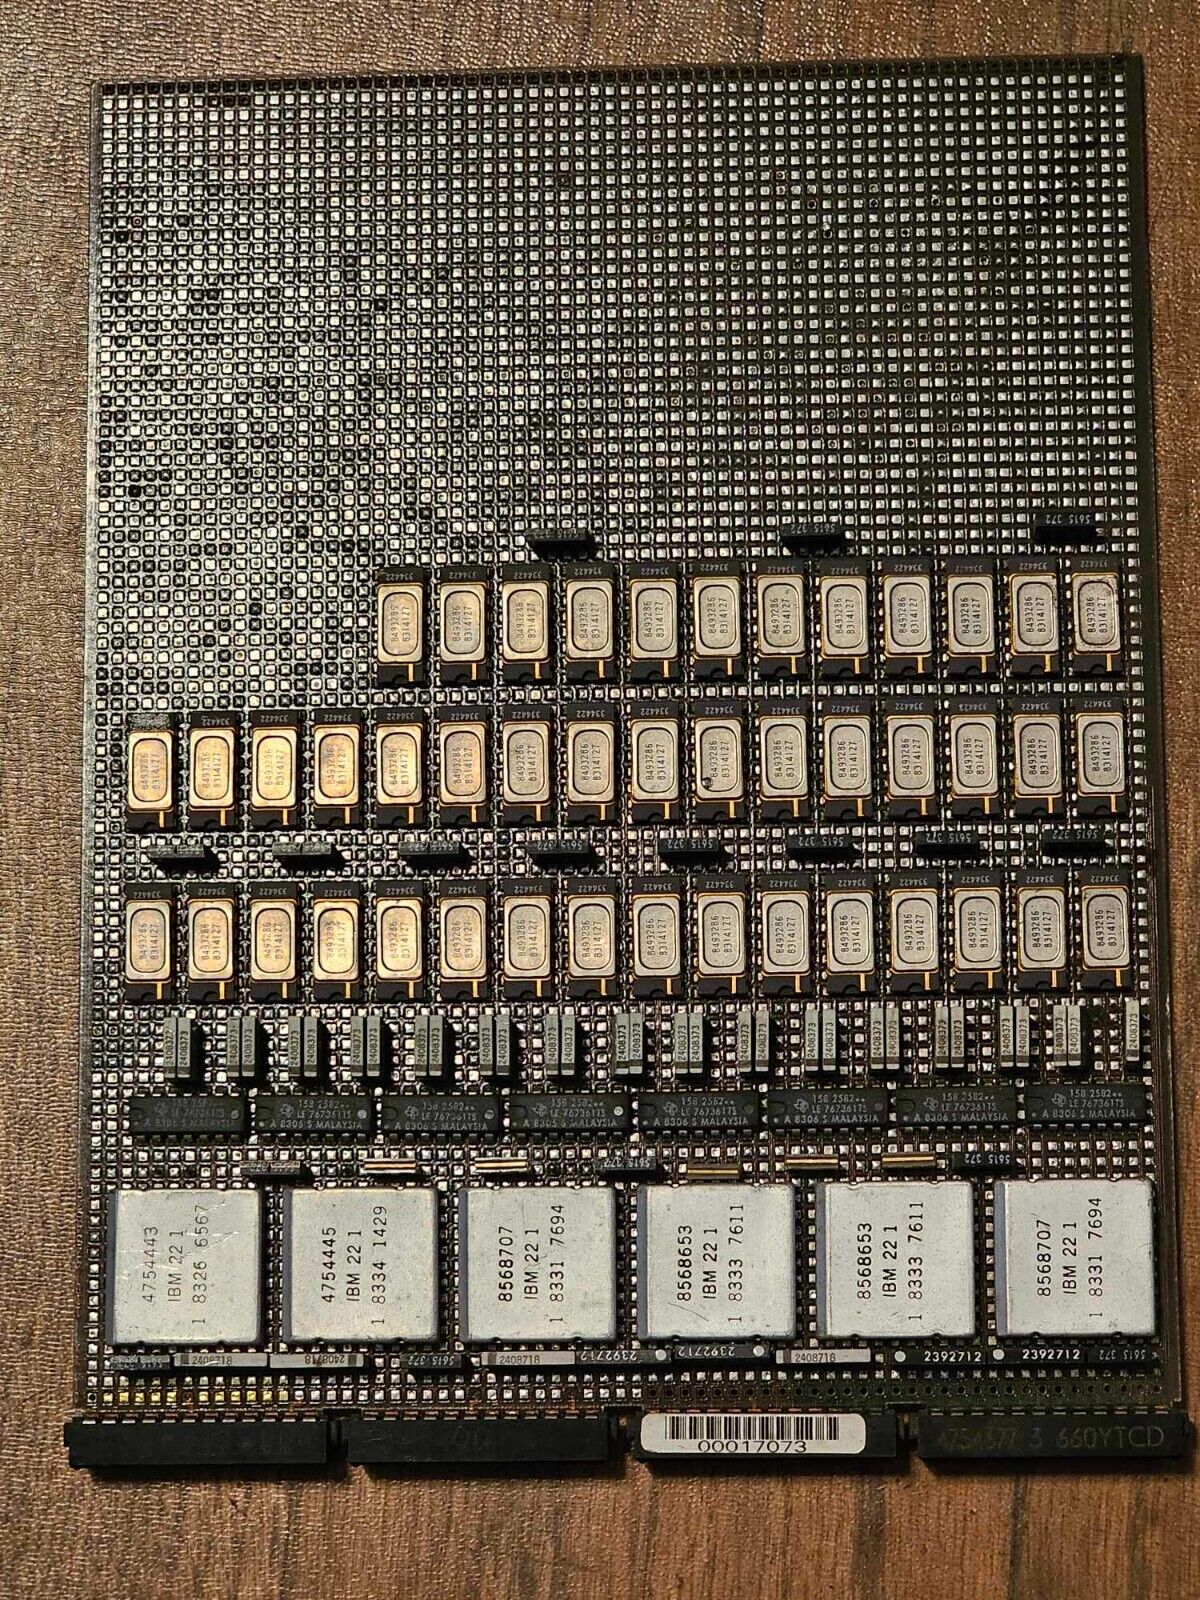 Rare Retro Vintage IBM Mainframe Board Module w/44 Gold IC Chips / Collector